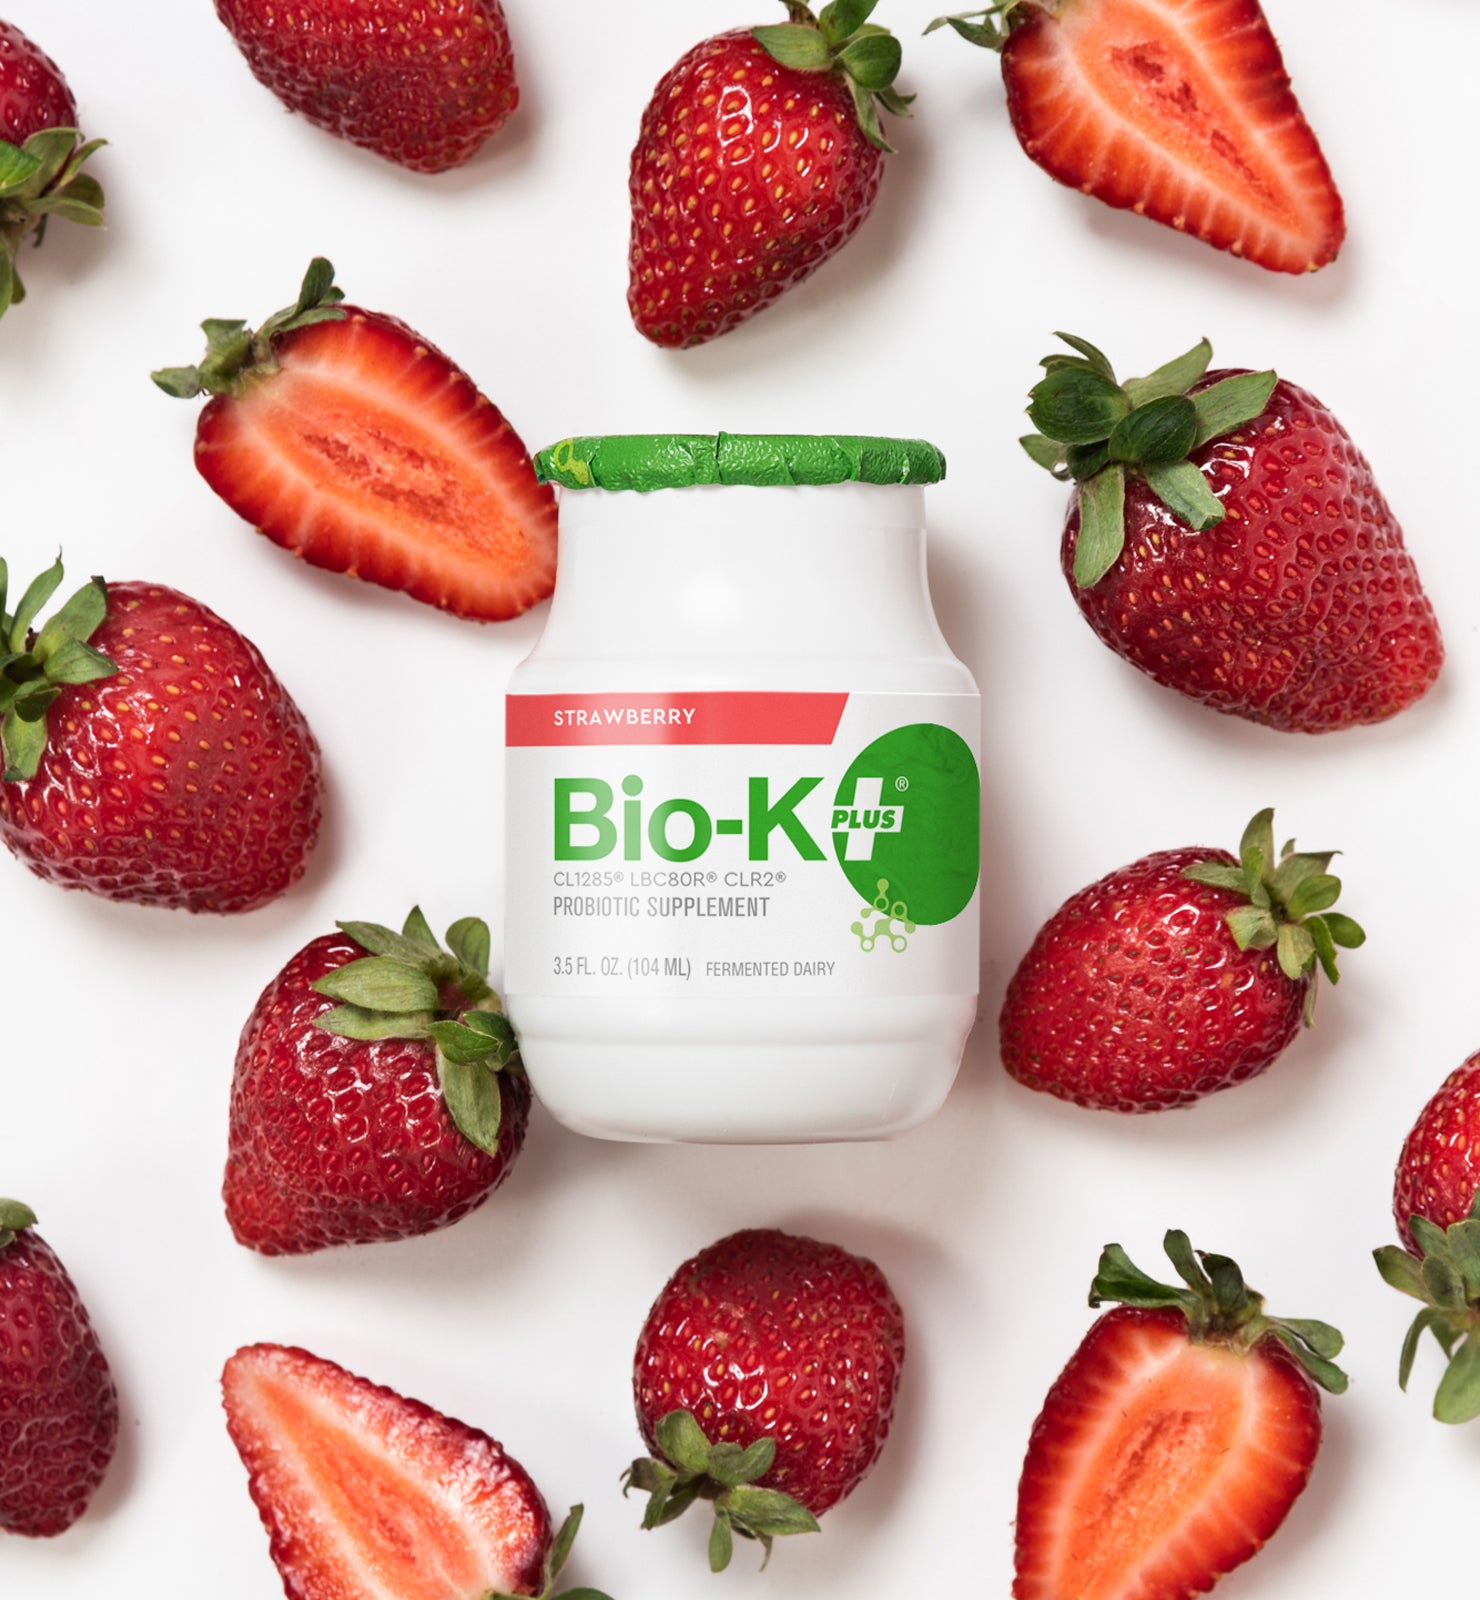 Drinkable Dairy Probiotic - Strawberry